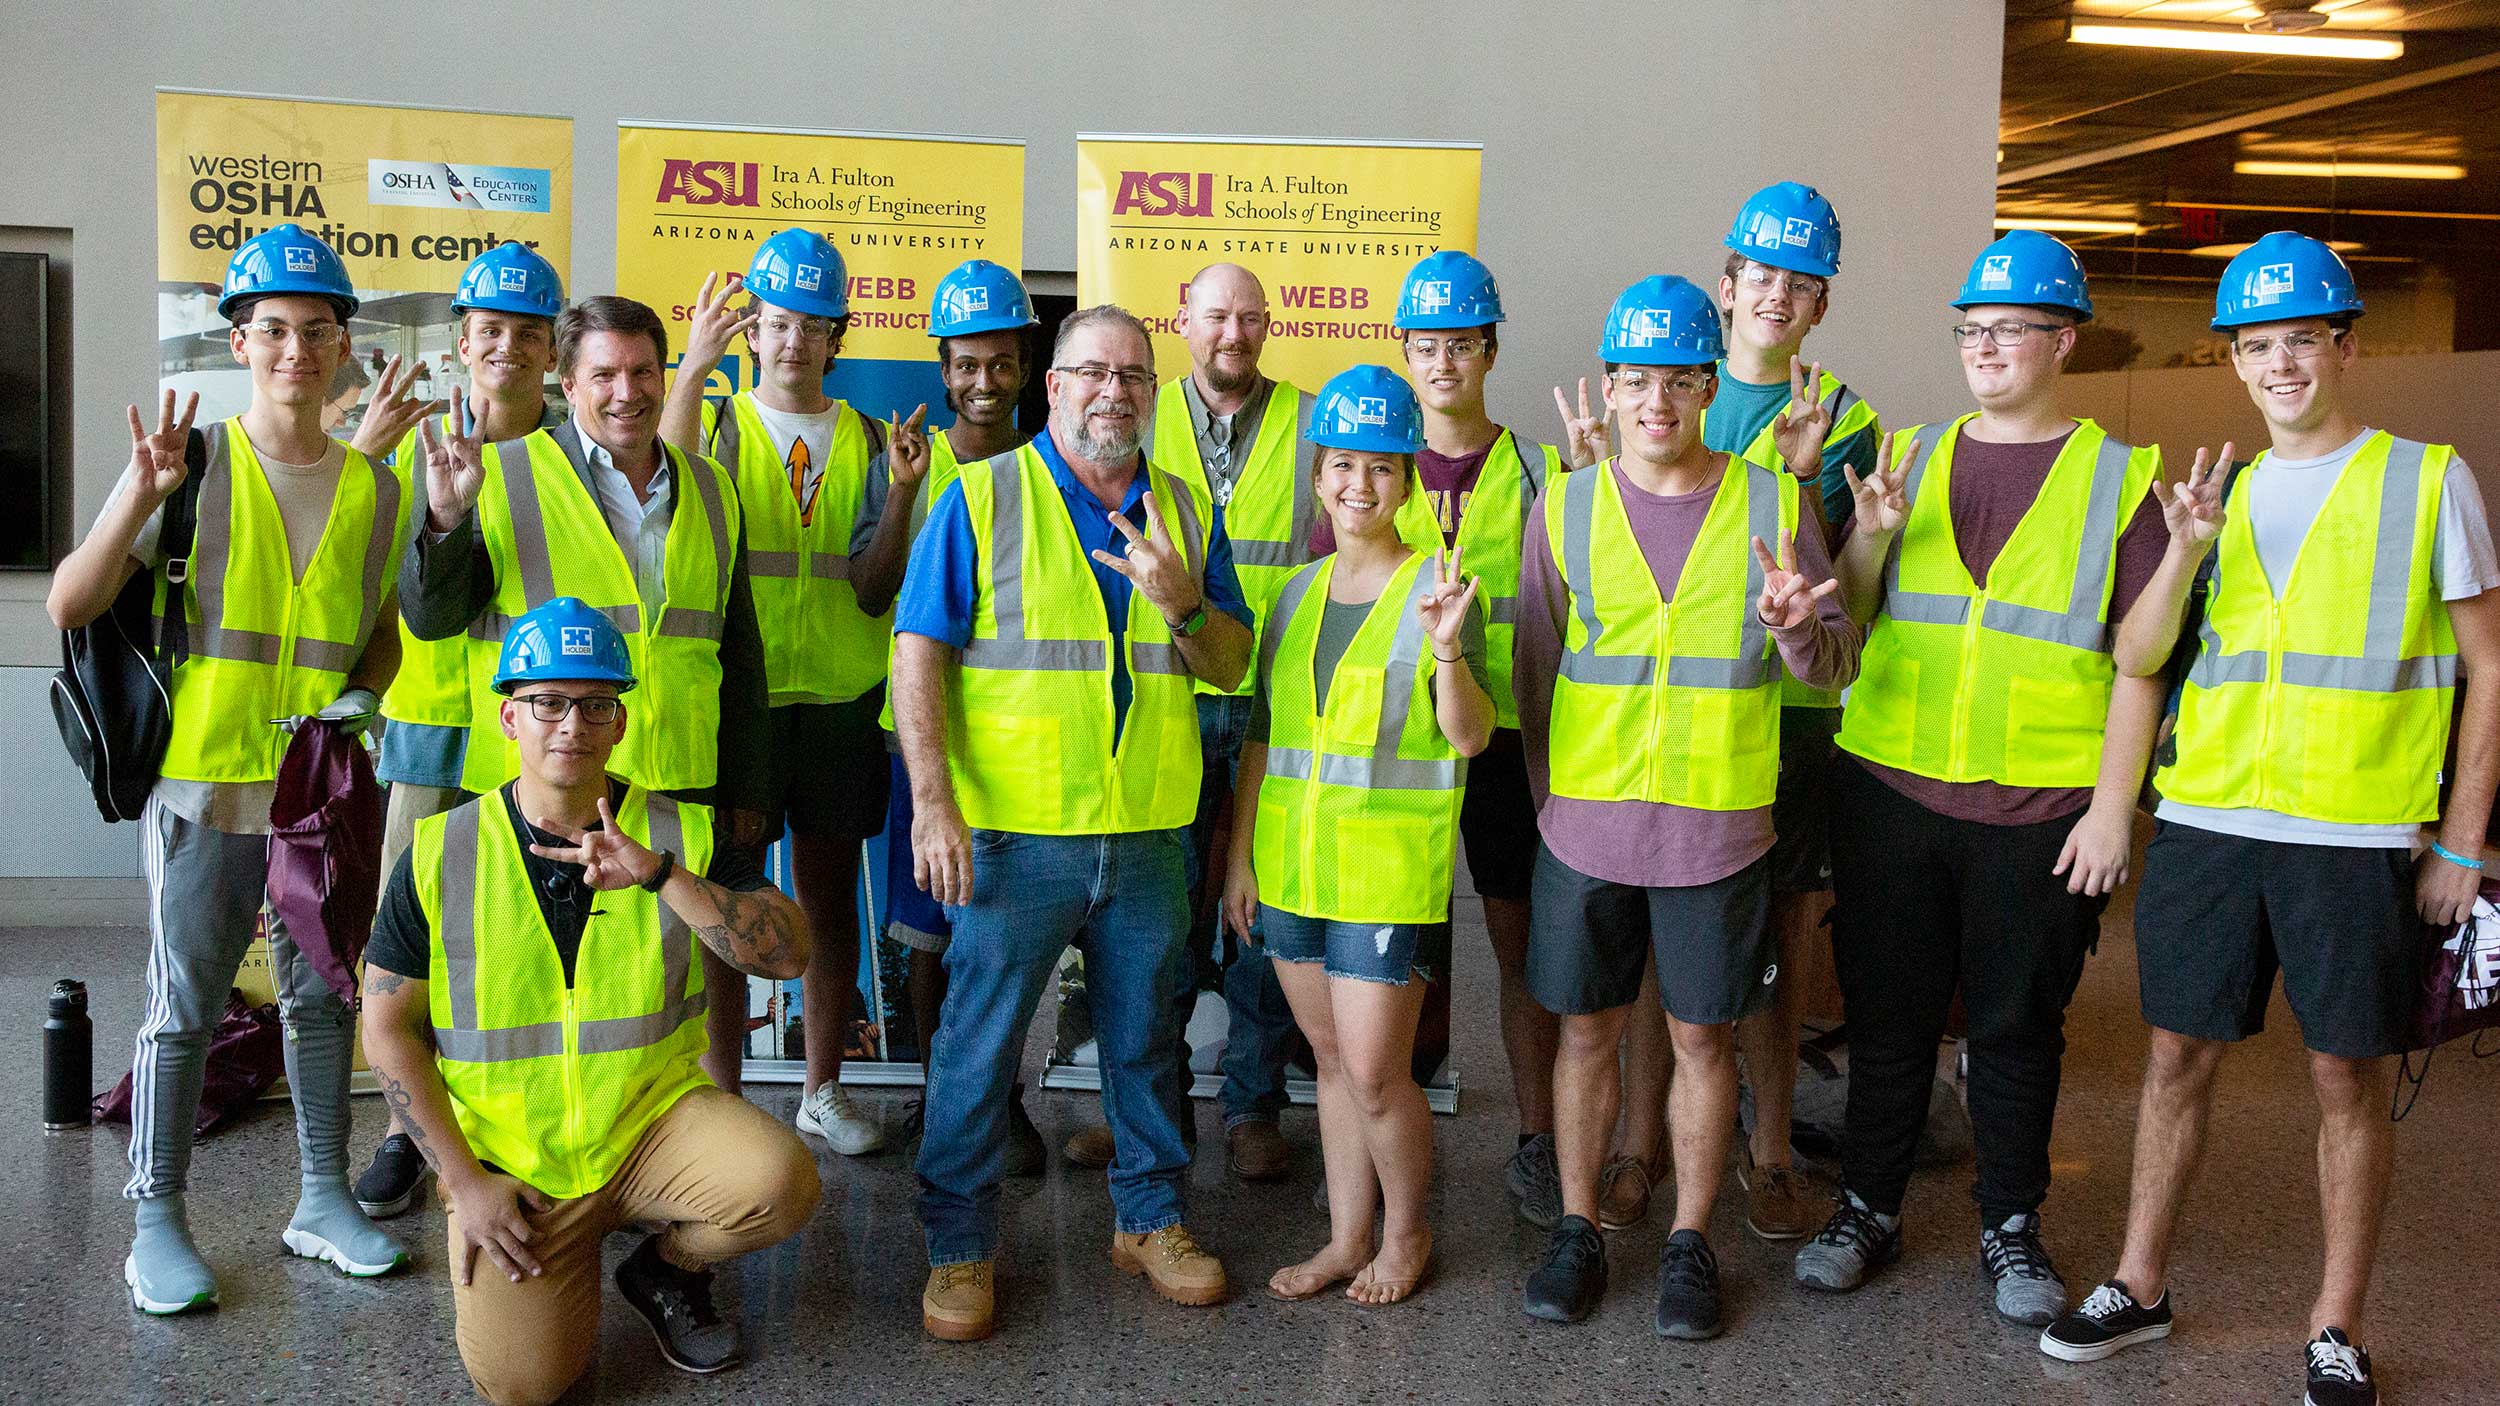 A group of newly "vested" construction freshmen stand for a group photo with faculty and industry professionals